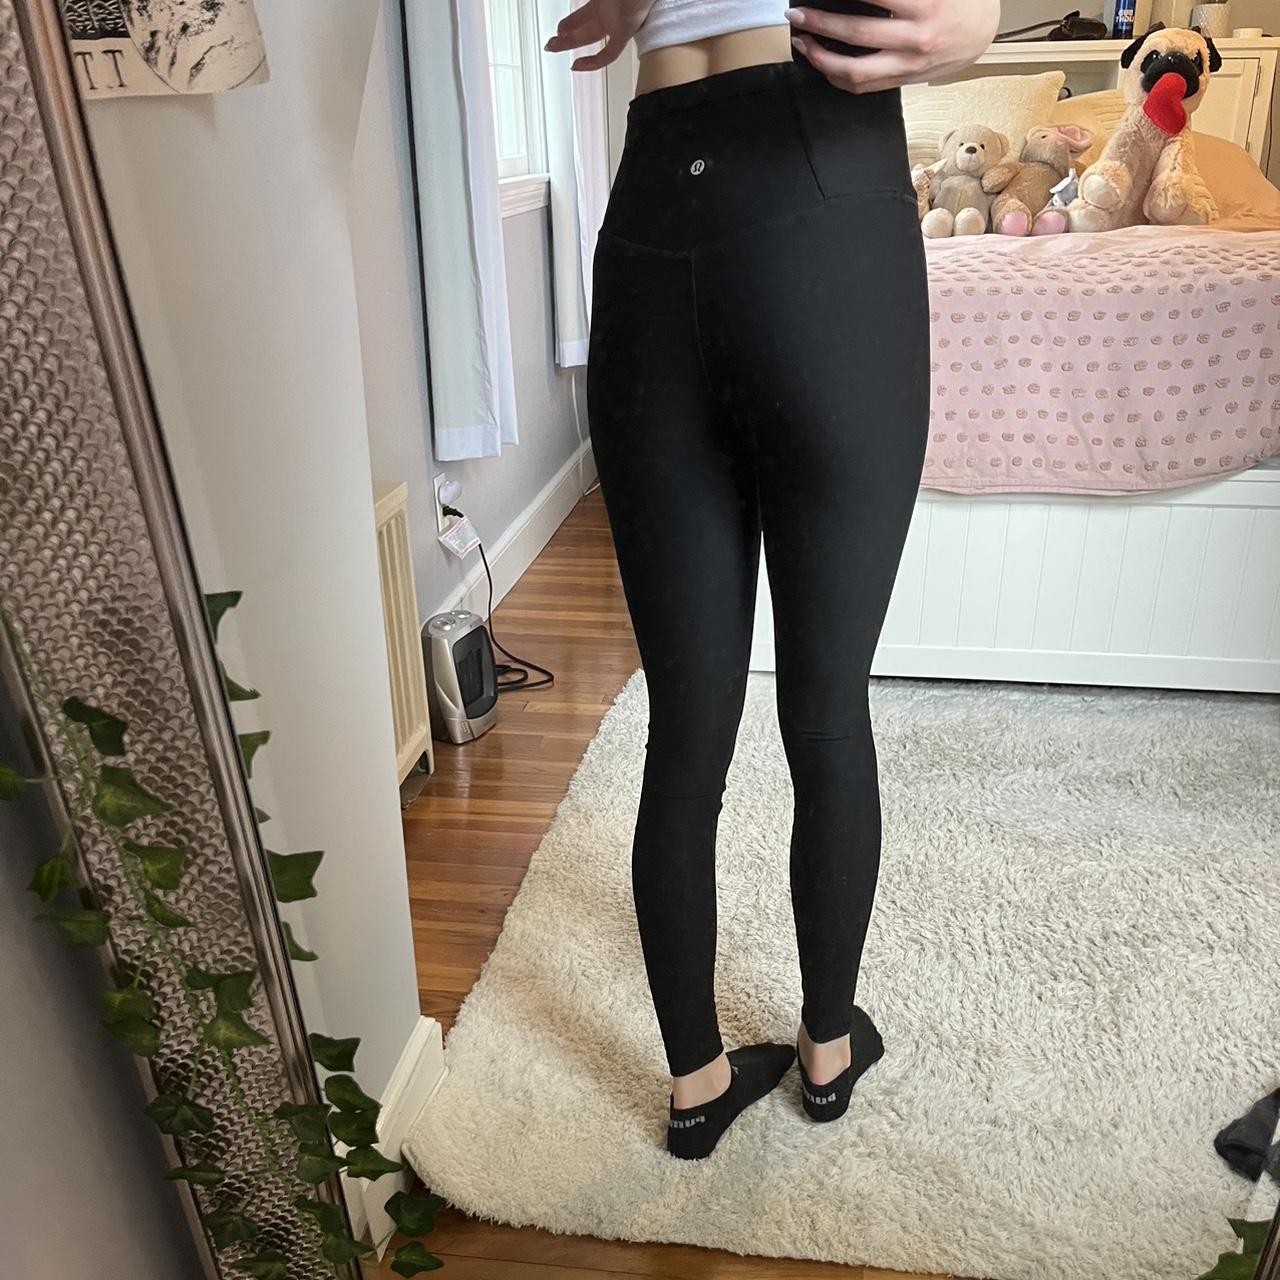 These Lululemon leggings are perfect for any